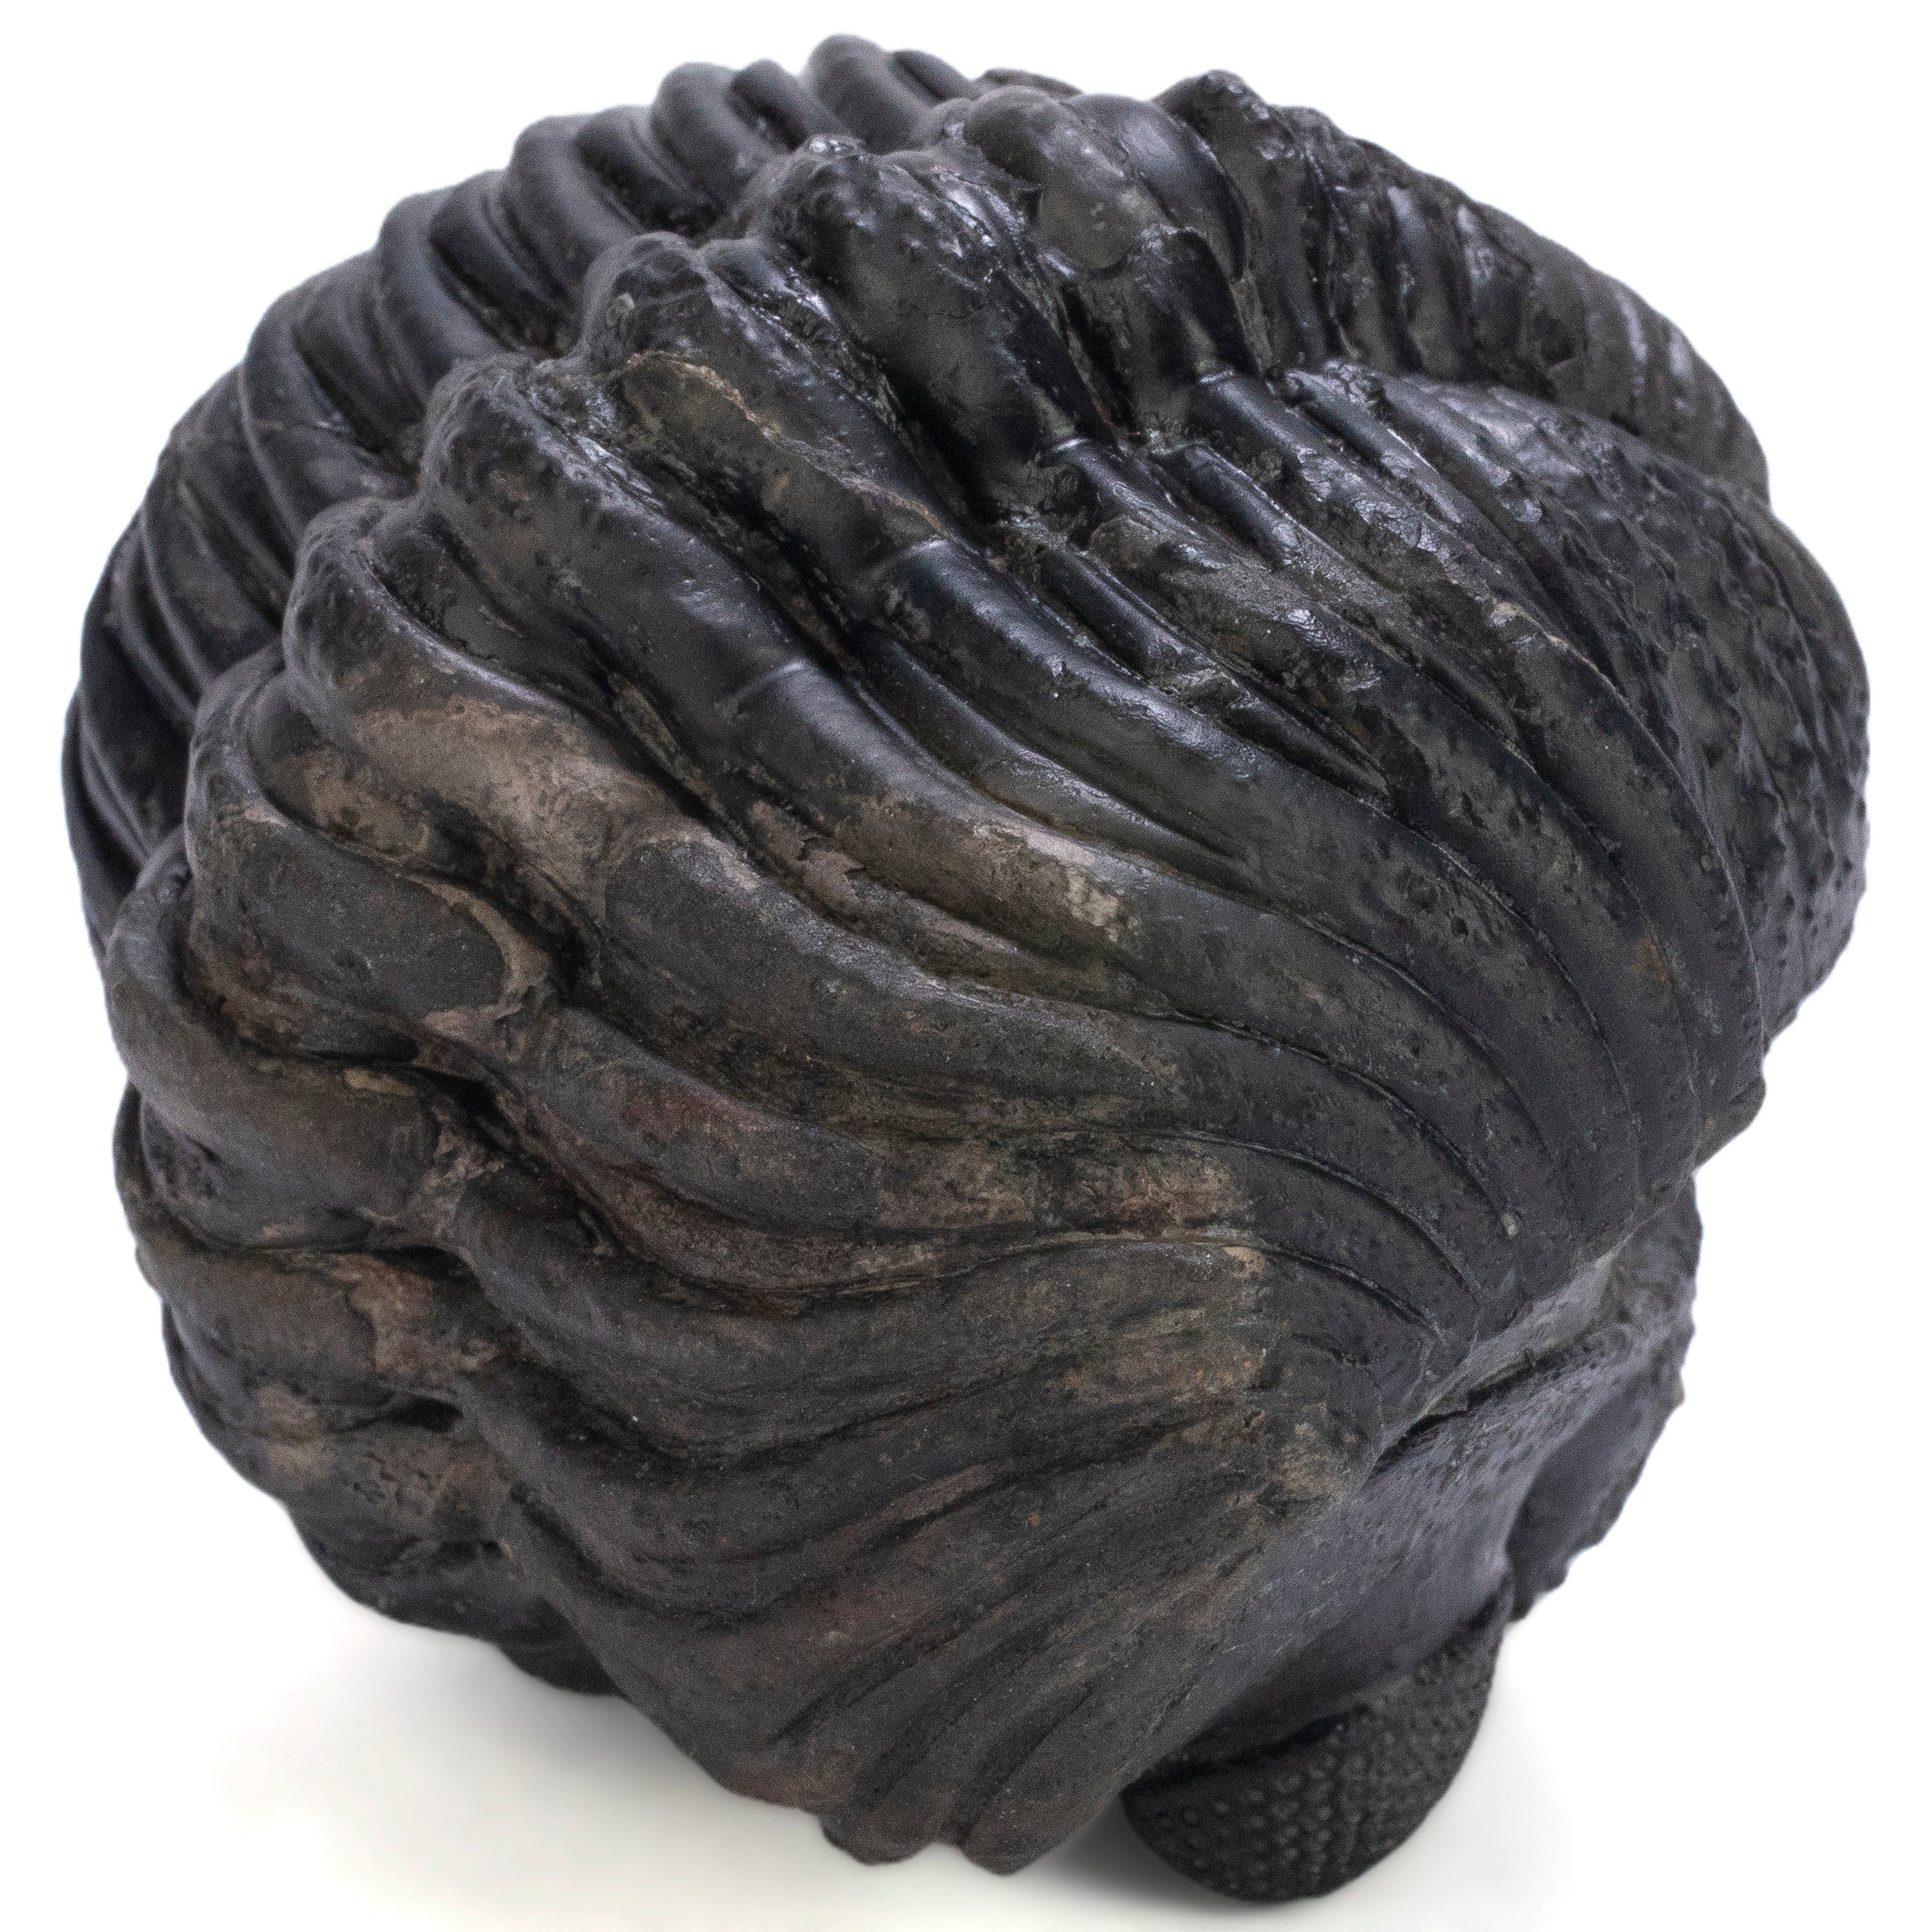 Kalifano Fossils & Minerals Enrolled Drotops Trilobite from Morocco - 3" TR3000.007